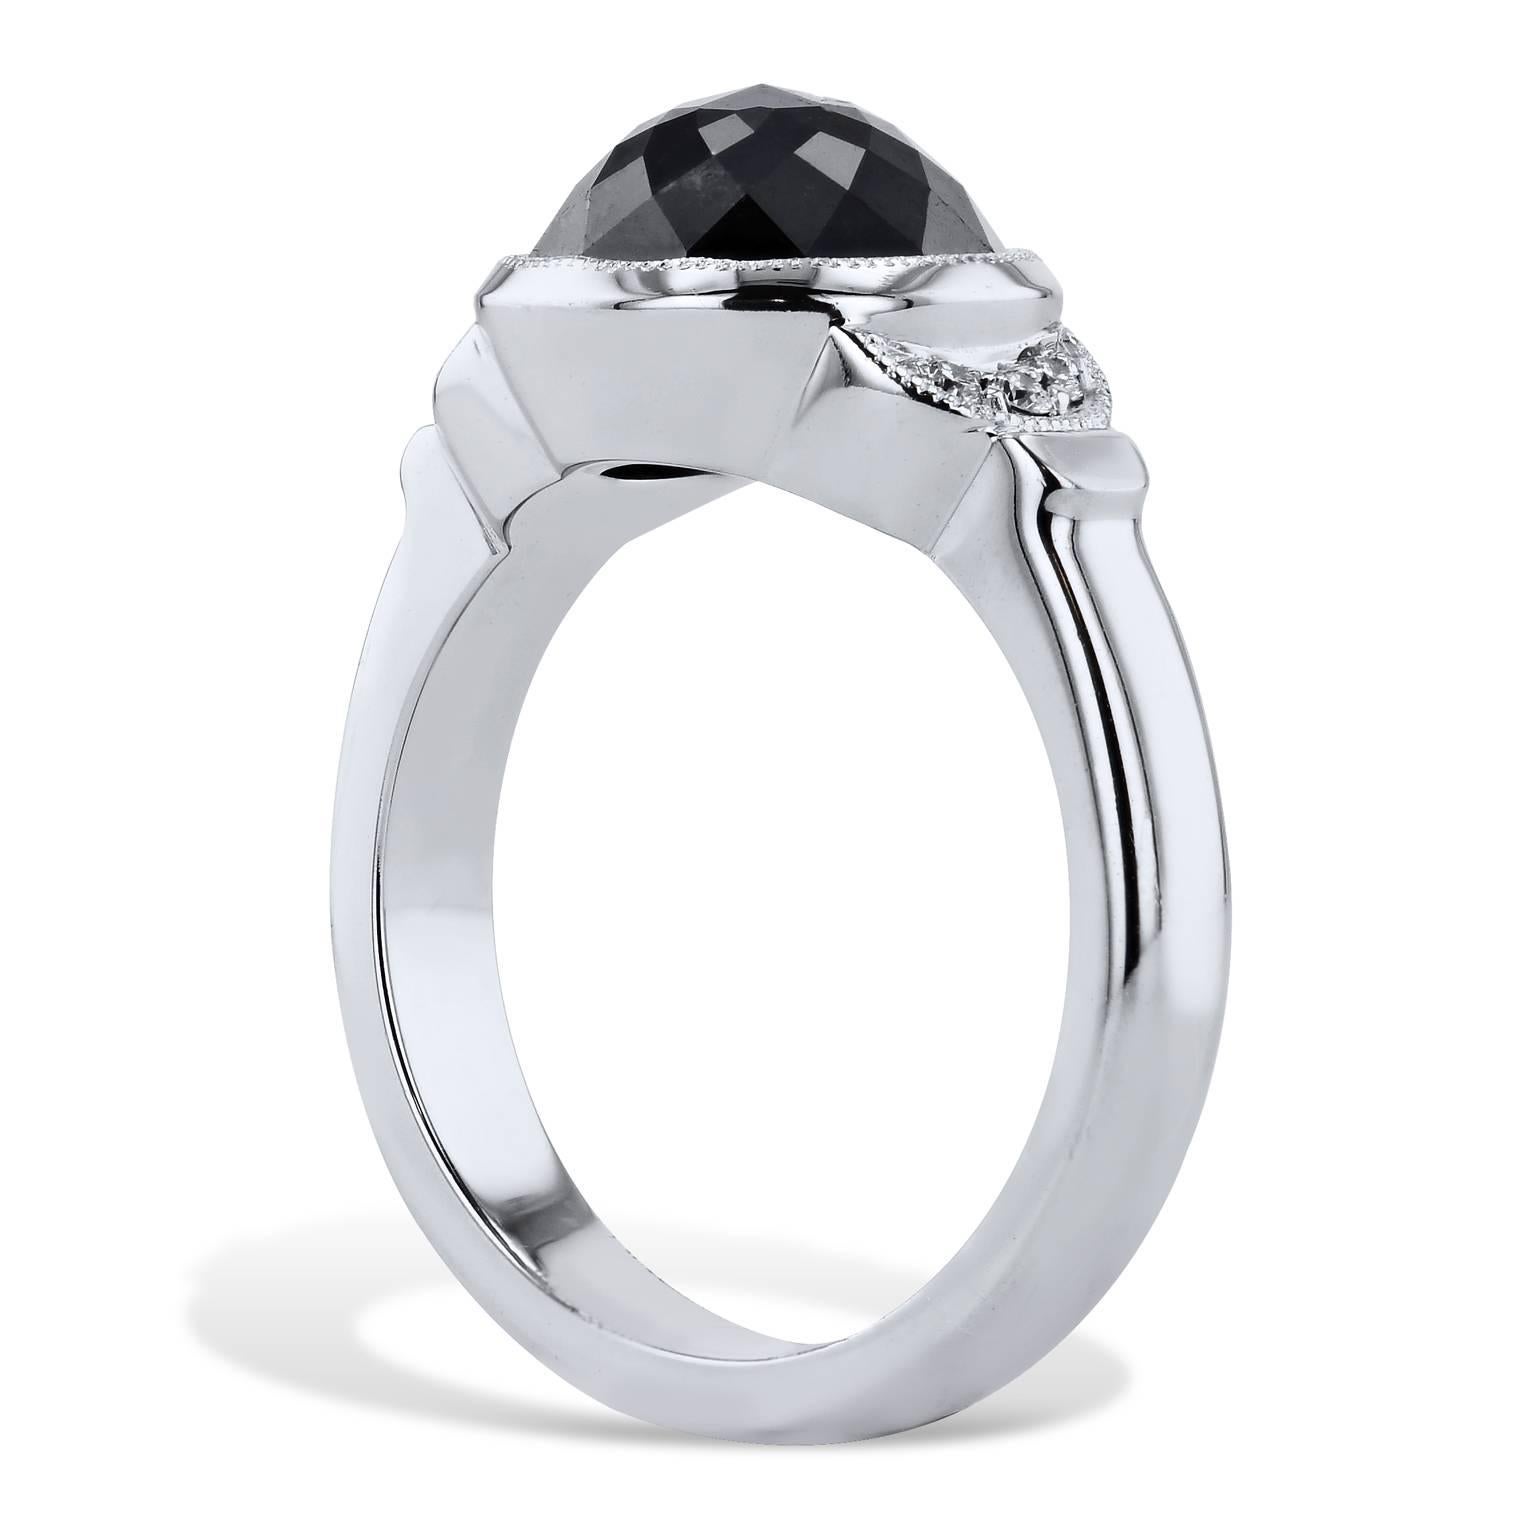 This beautiful rose cut black diamond ring is handmade and one of a kind. It features a stunning 4.00 carat rose cut black diamond that is bezel set. It also has 0.06 carats of pave diamonds that are set in a crescent moon shape. These white